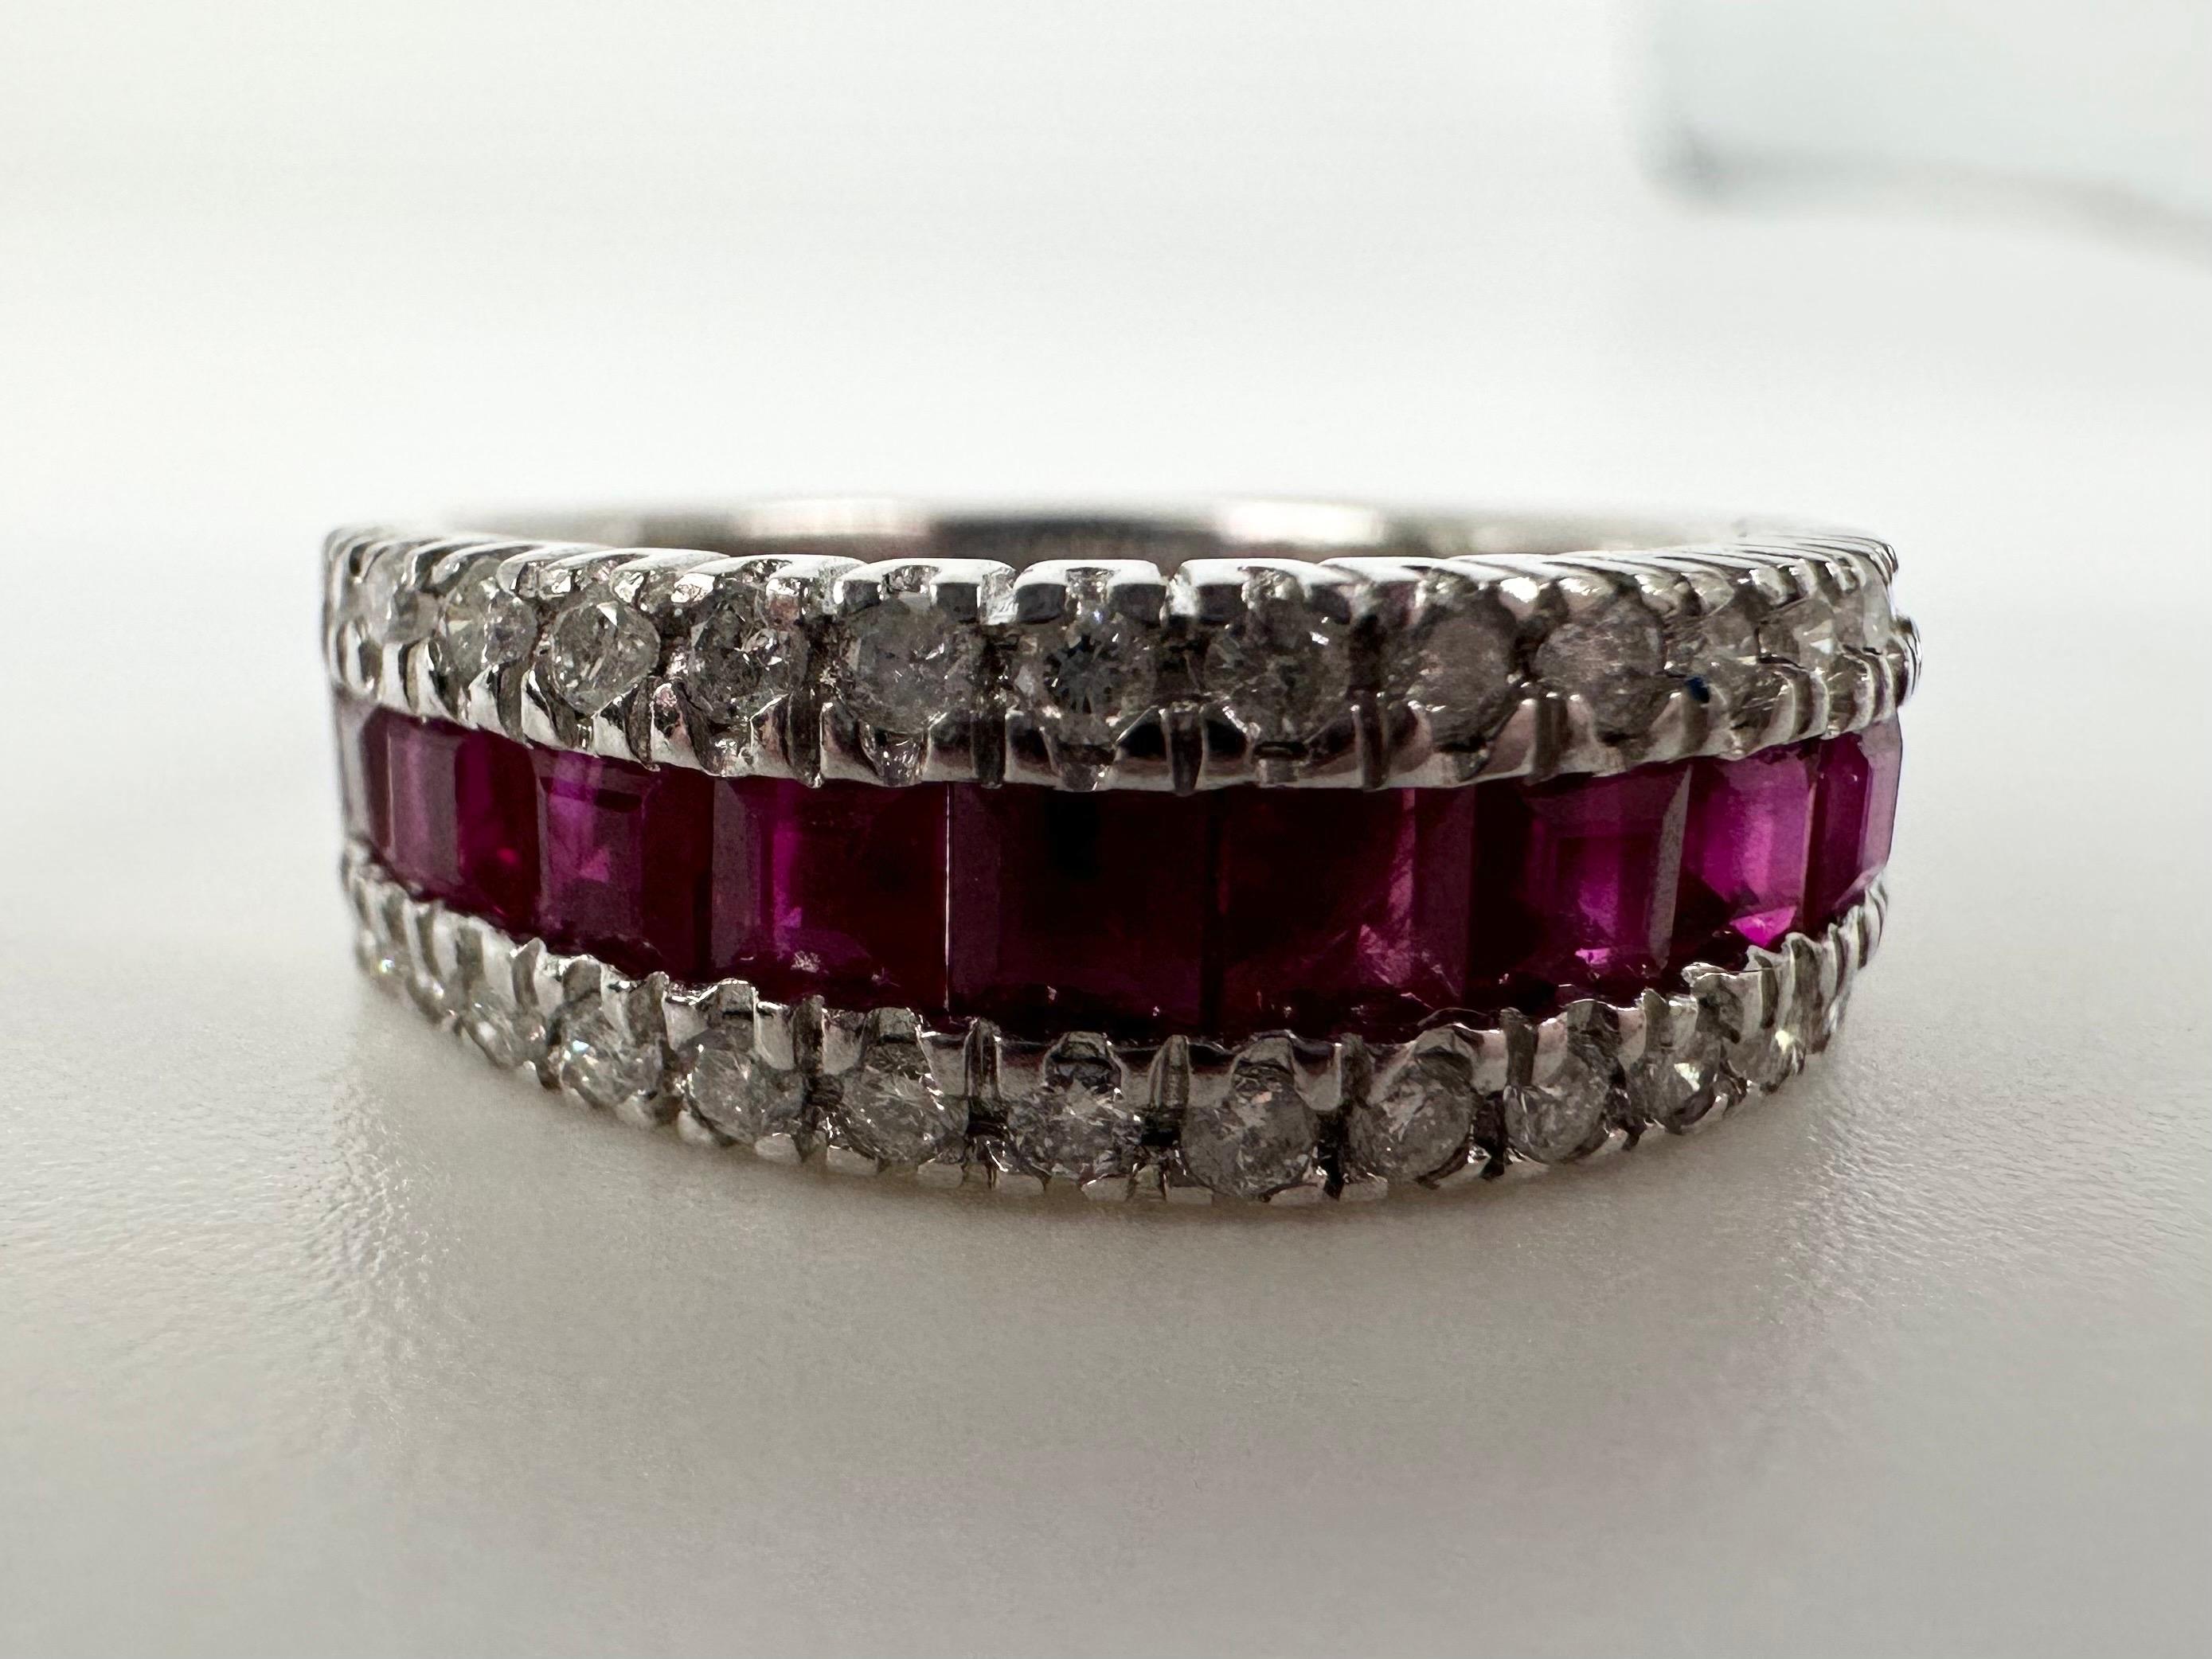 Fancy band with natural diamonds and rubies made in 14KT white gold excellent craftmanship and incredible color rubies. 

GOLD: 14KT gold
NATURAL DIAMOND(S)
Clarity/Color: SI/H
Carat:0.66ct
Cut:Round Brilliant
NATURAL RUBY(S)
Clarity/Color: Slightly